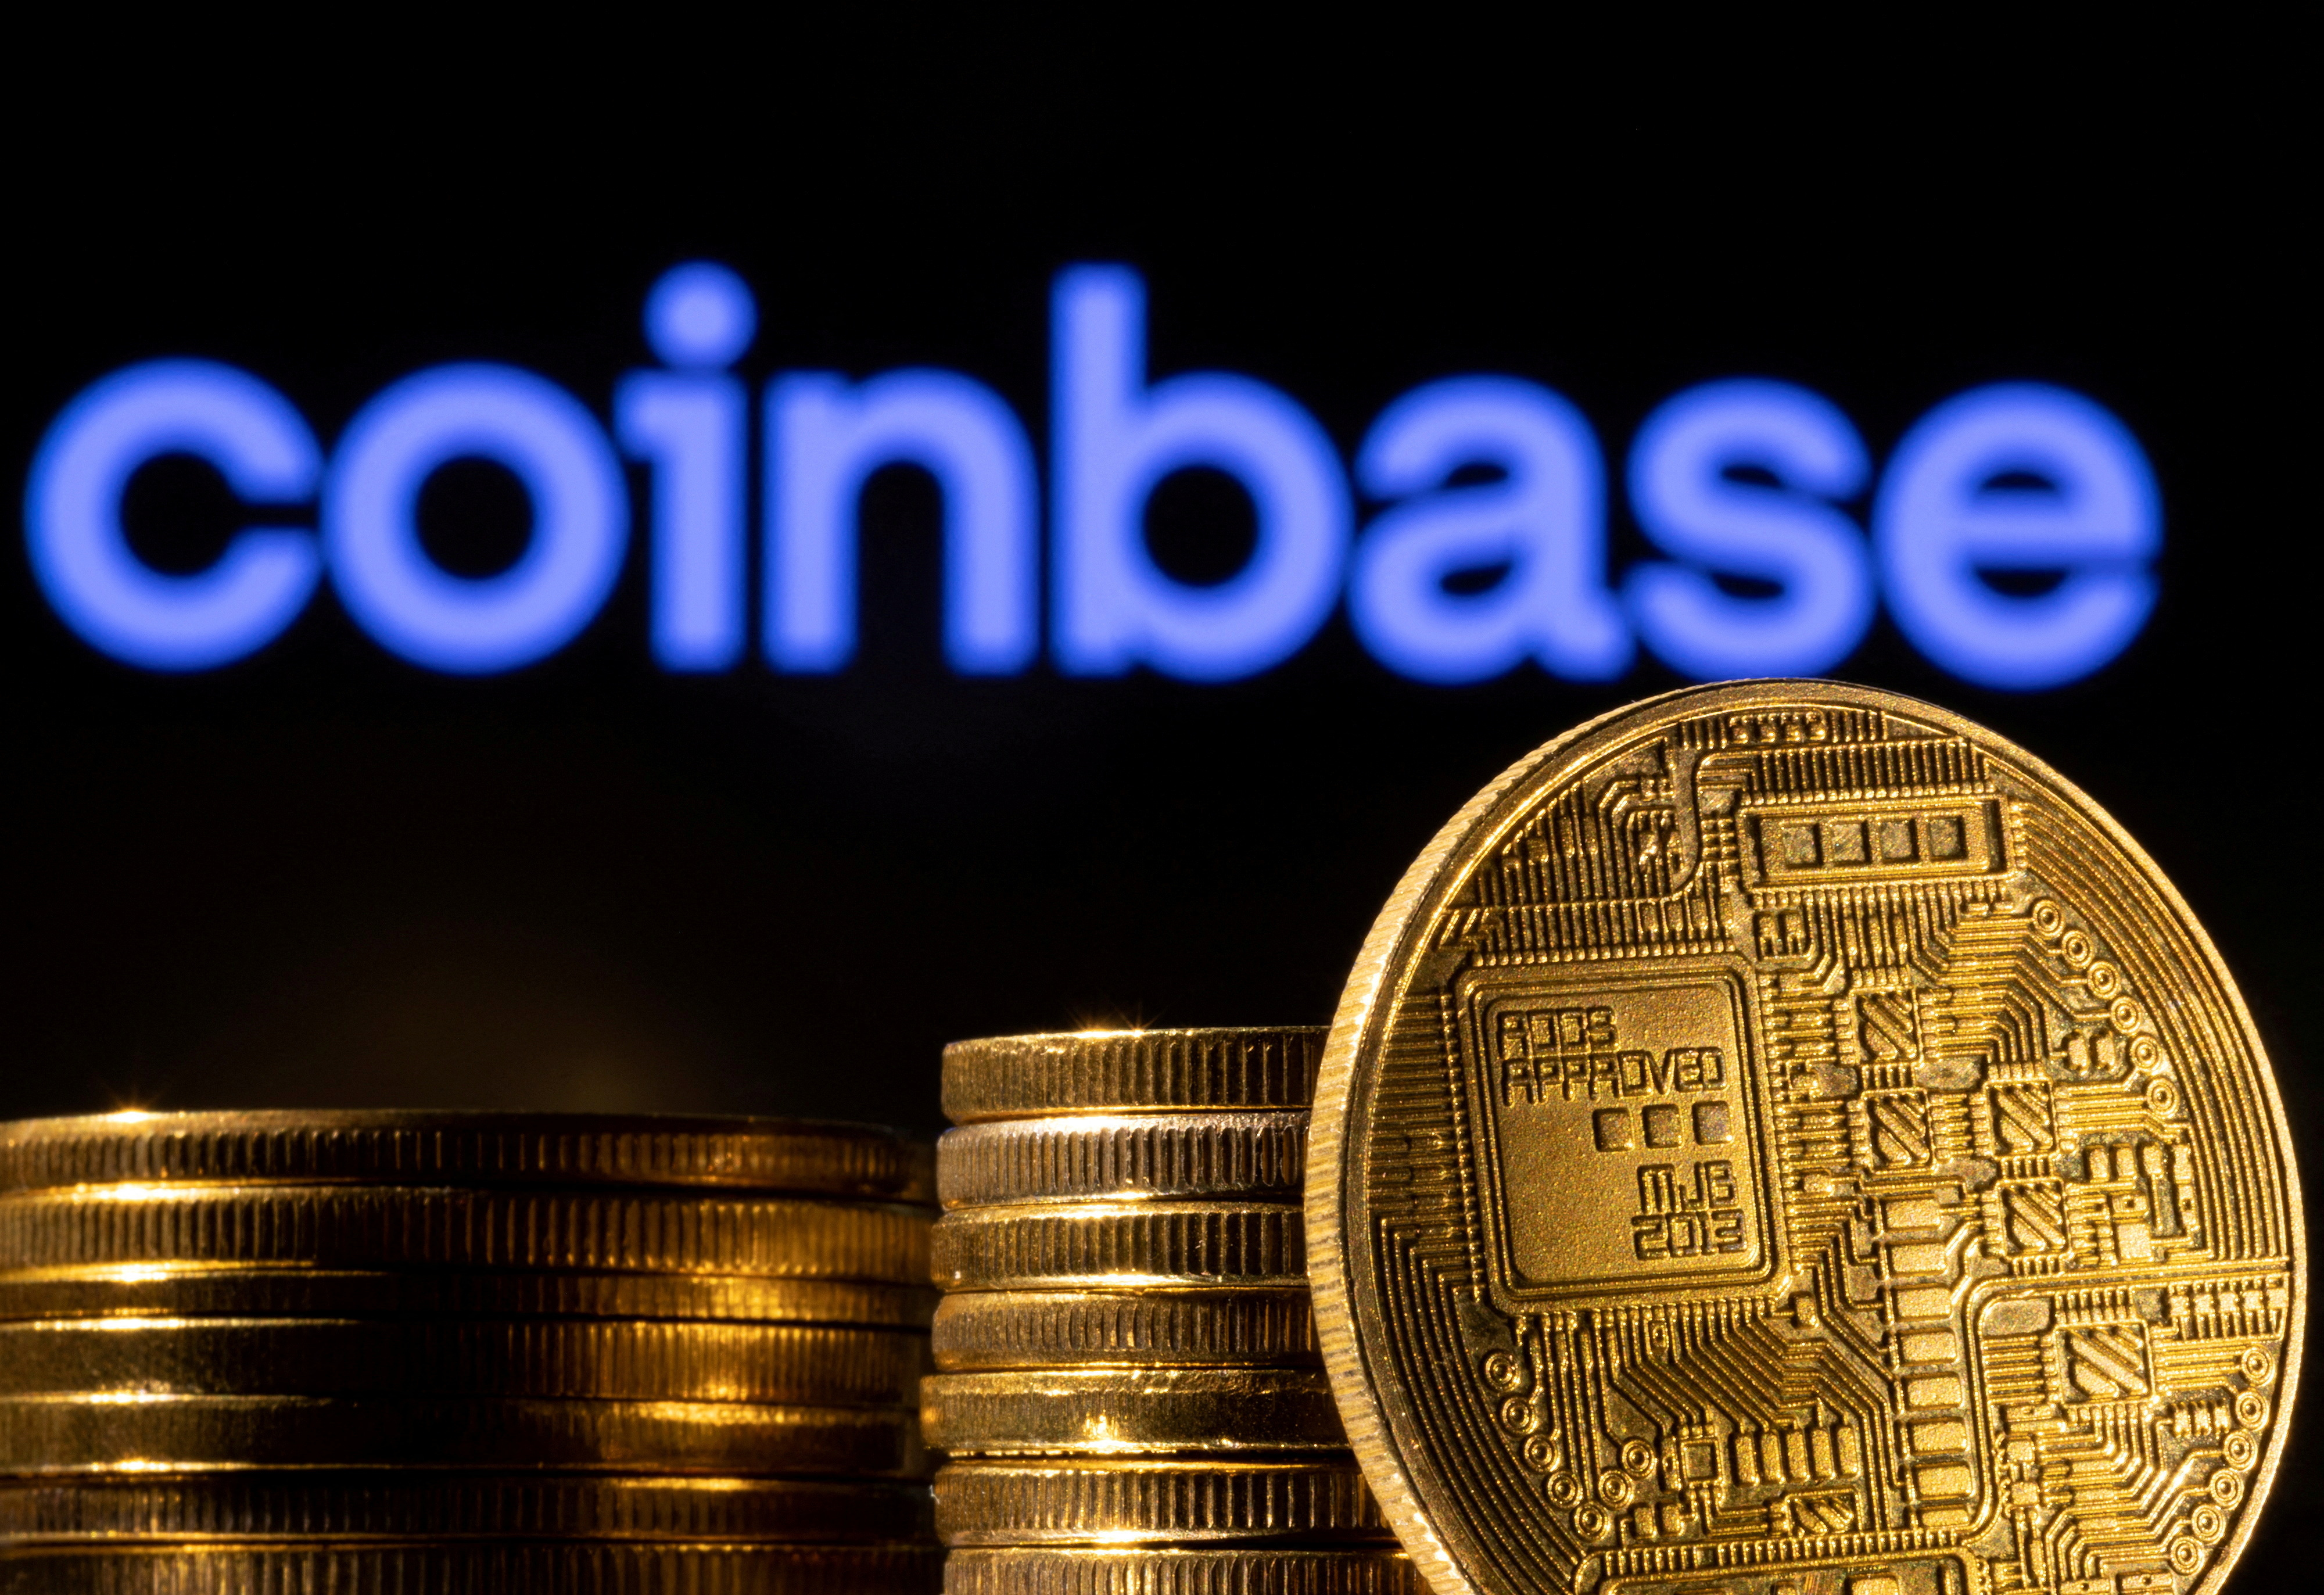 Coinbase CEO Asks If BofA Has Closed Accounts Dealing With Firm